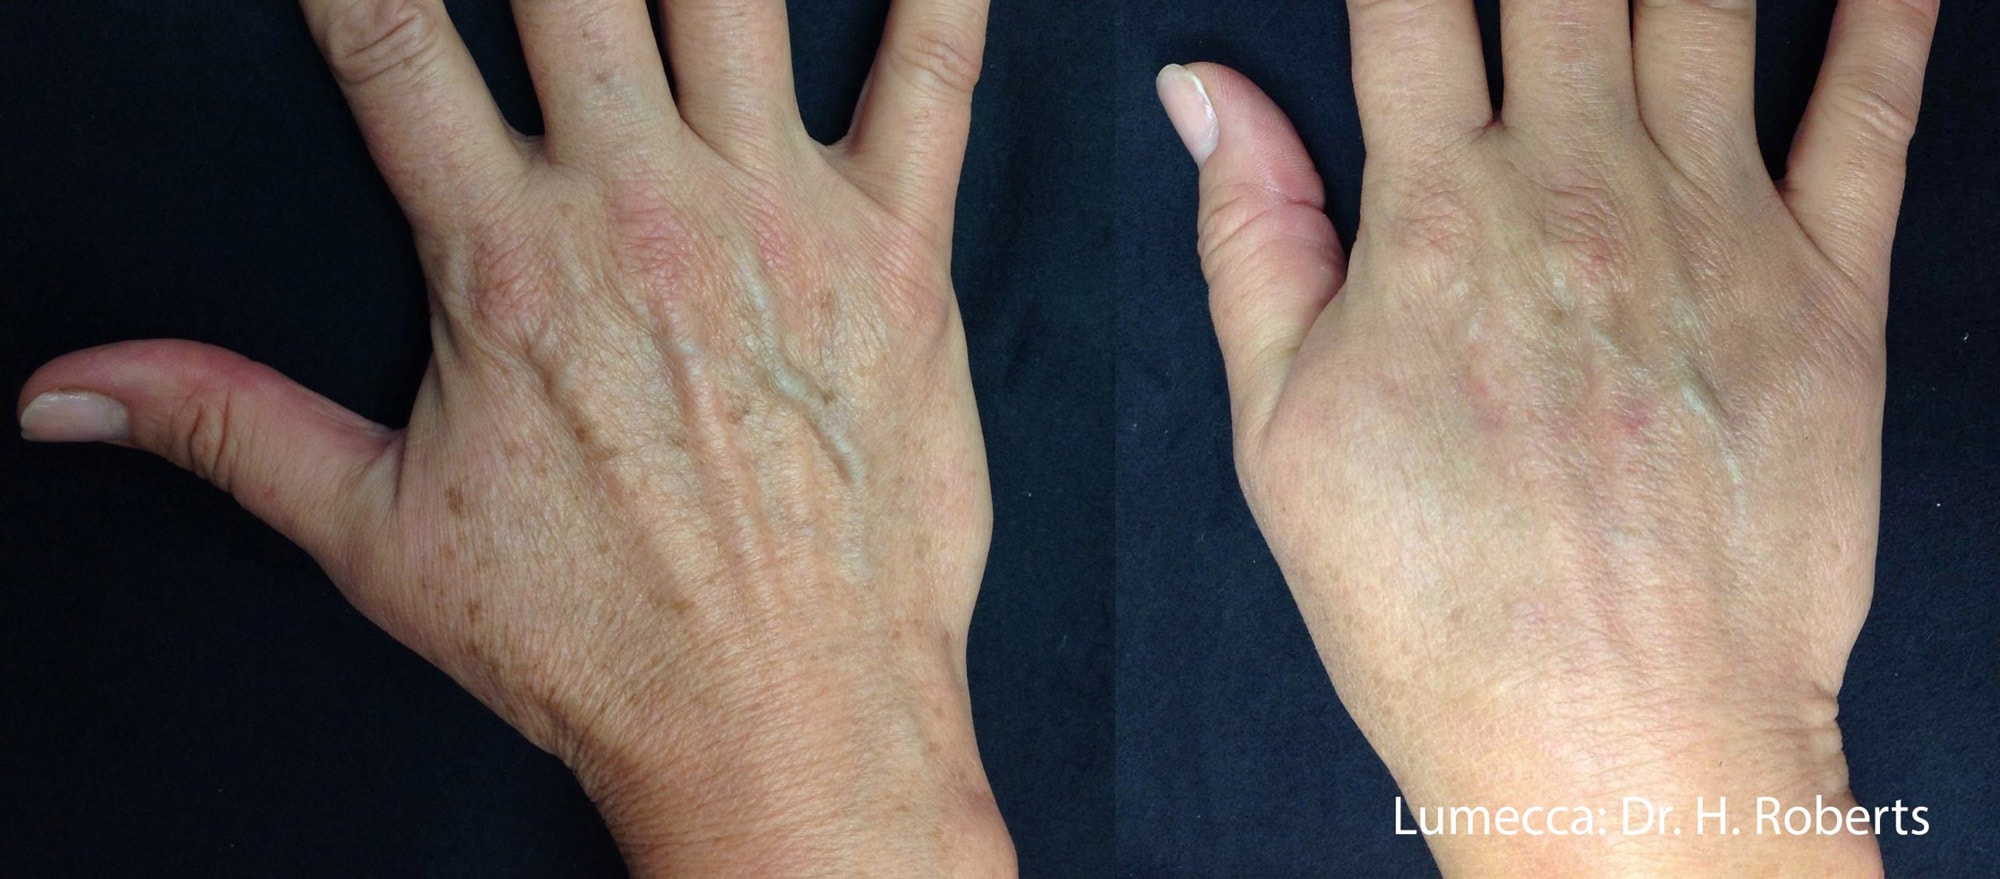 Before and After photos showing Lumecca treatments eliminating dark spots and pigmentation on a woman’s hands